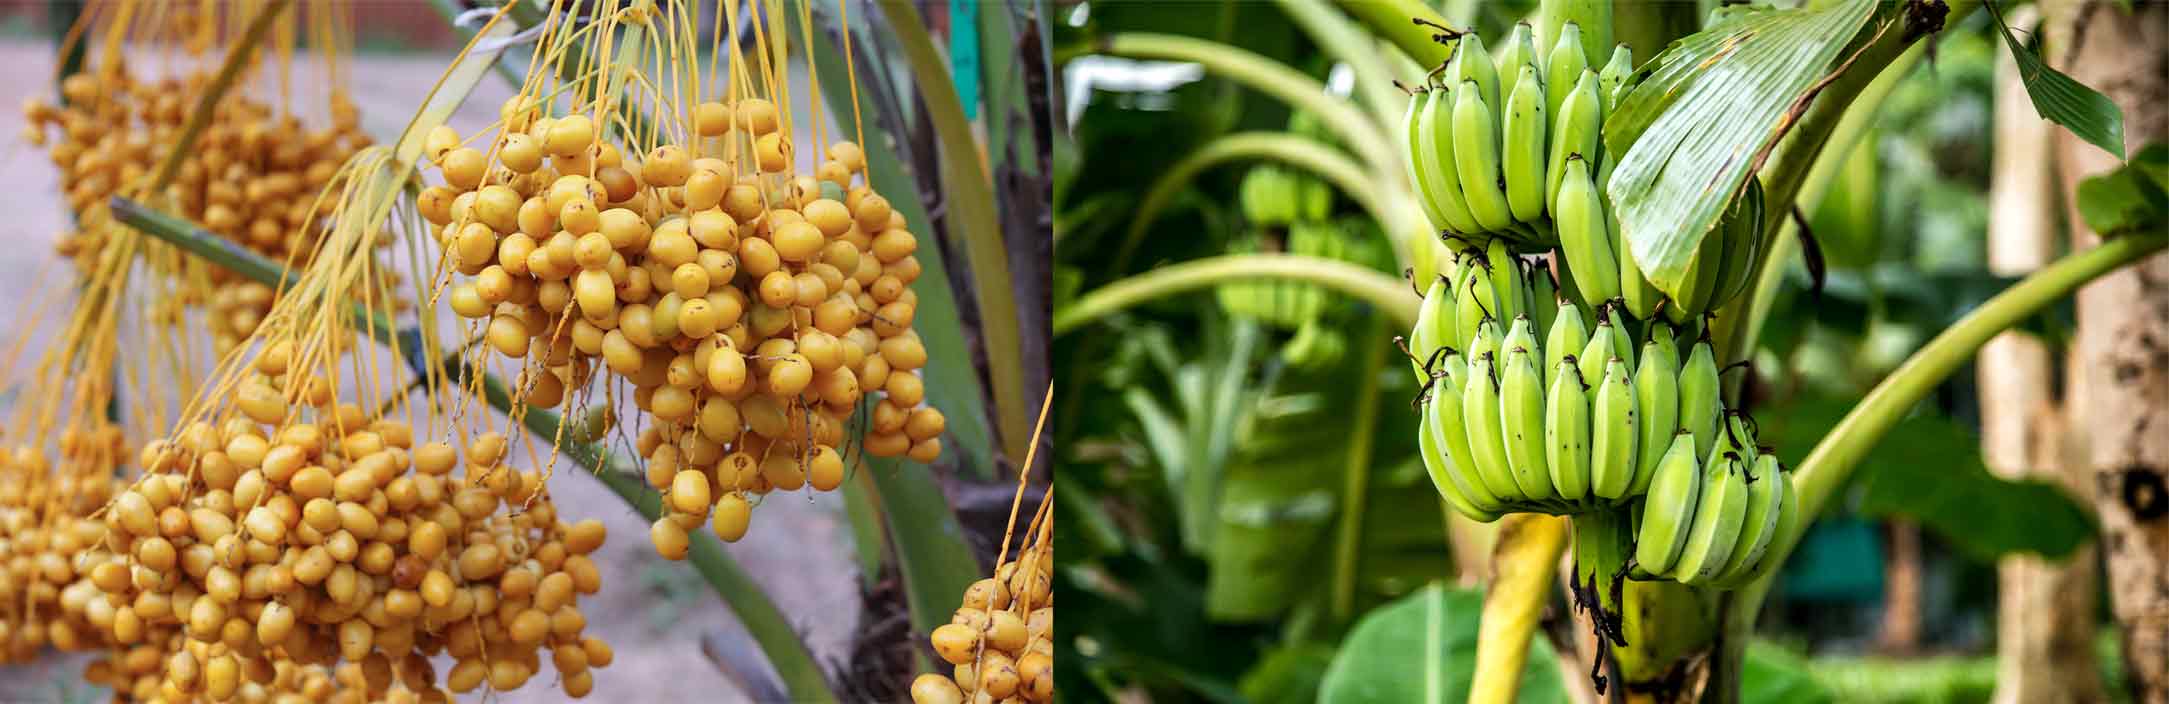 What fruit does the Canary Island date palm produce